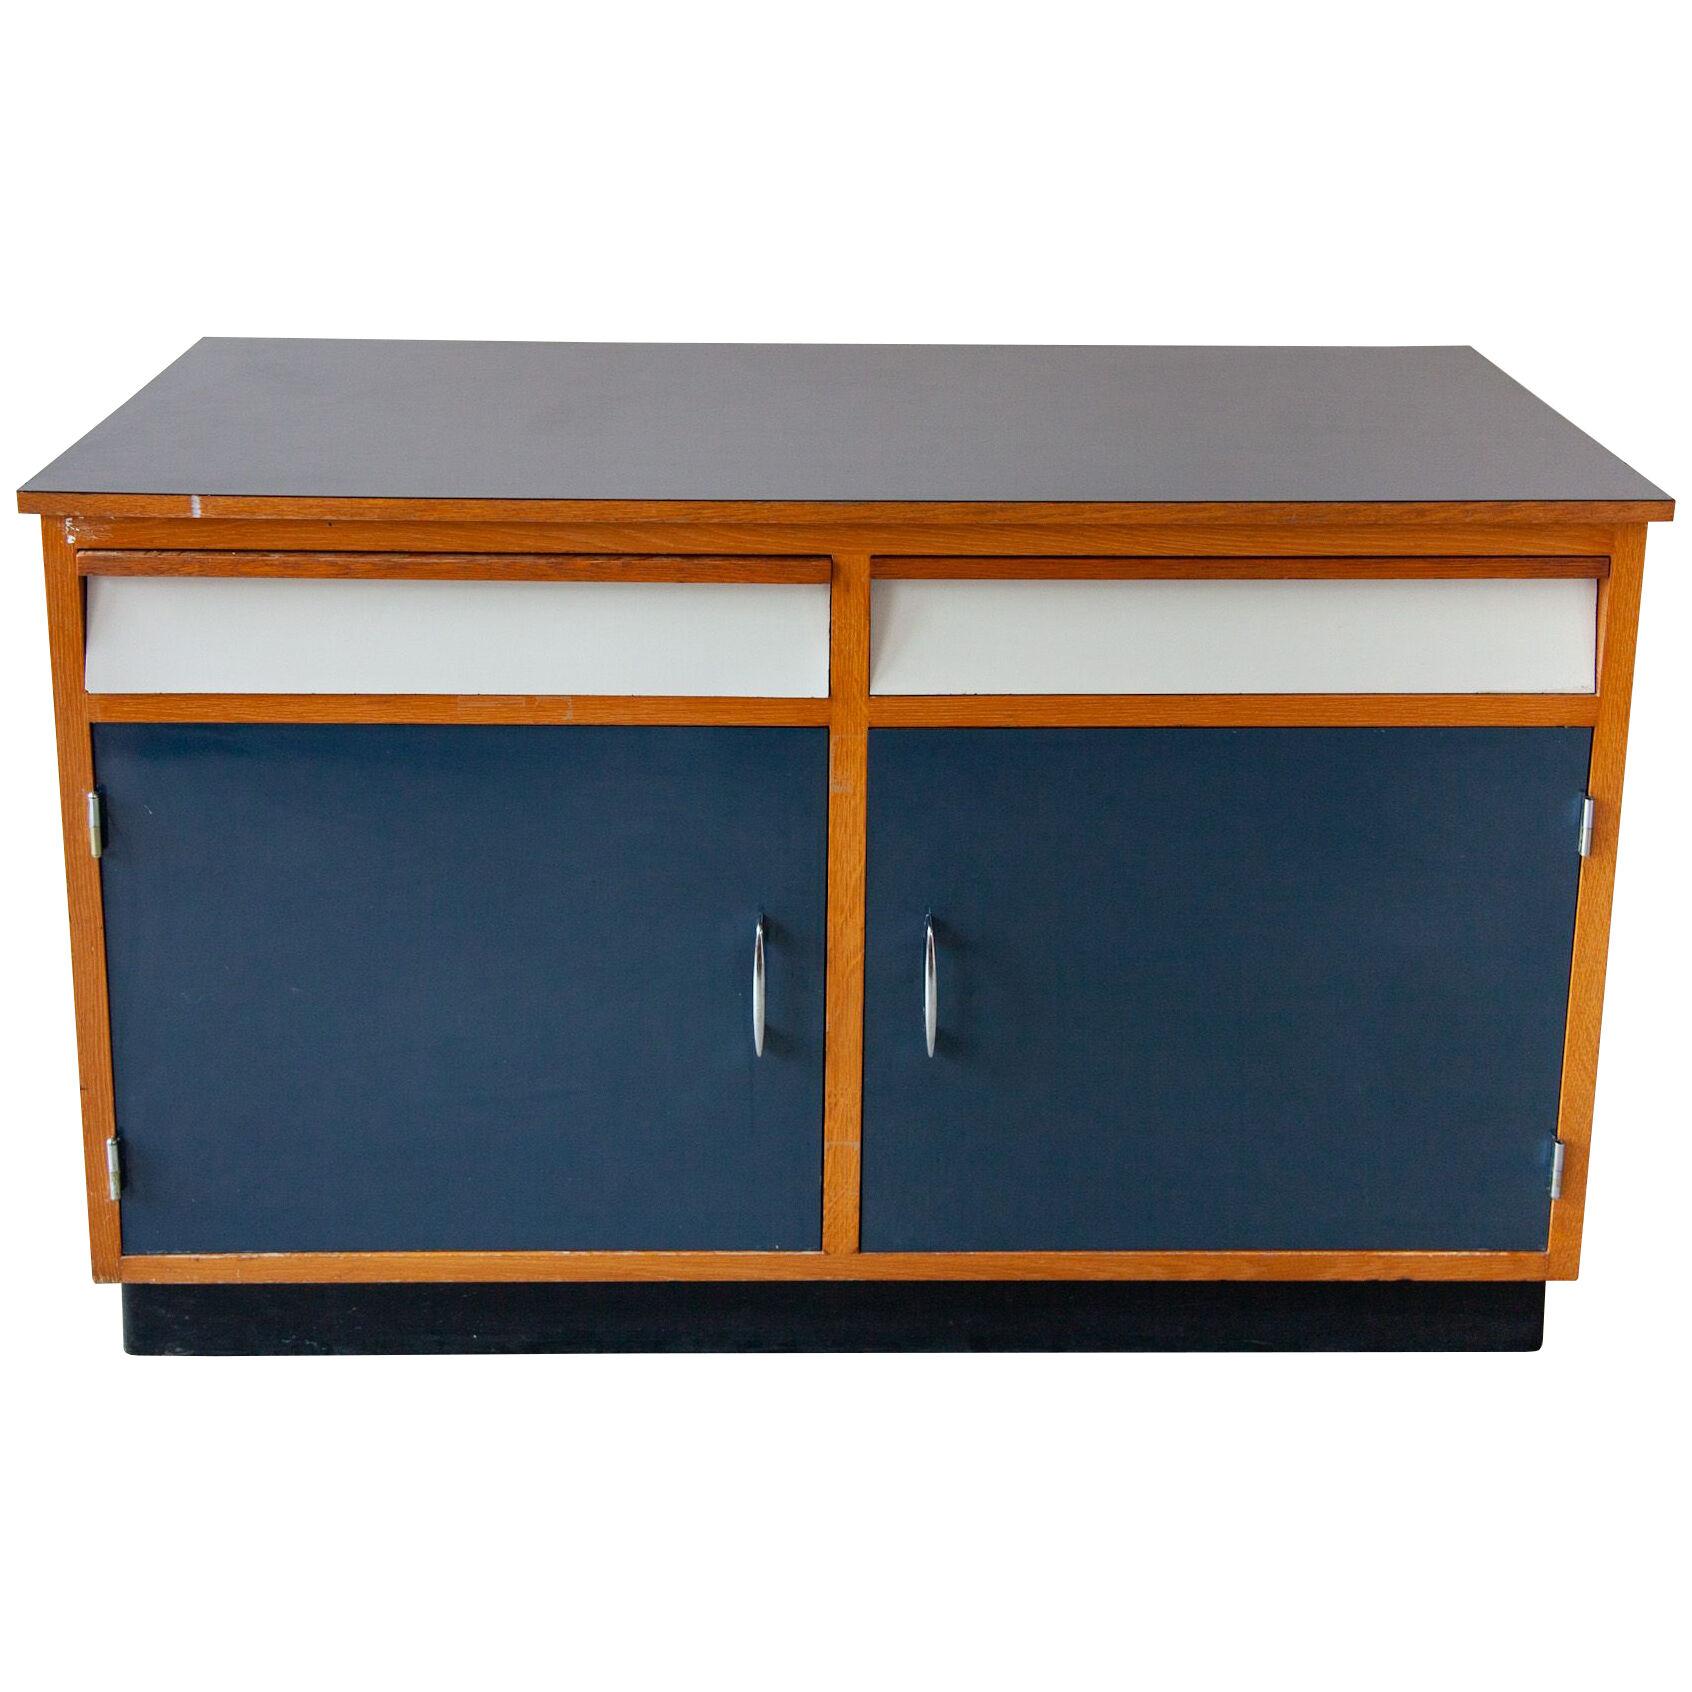 Modernist Blue and White Laminate Fifties Sideboard Tubax 1958, Belgium